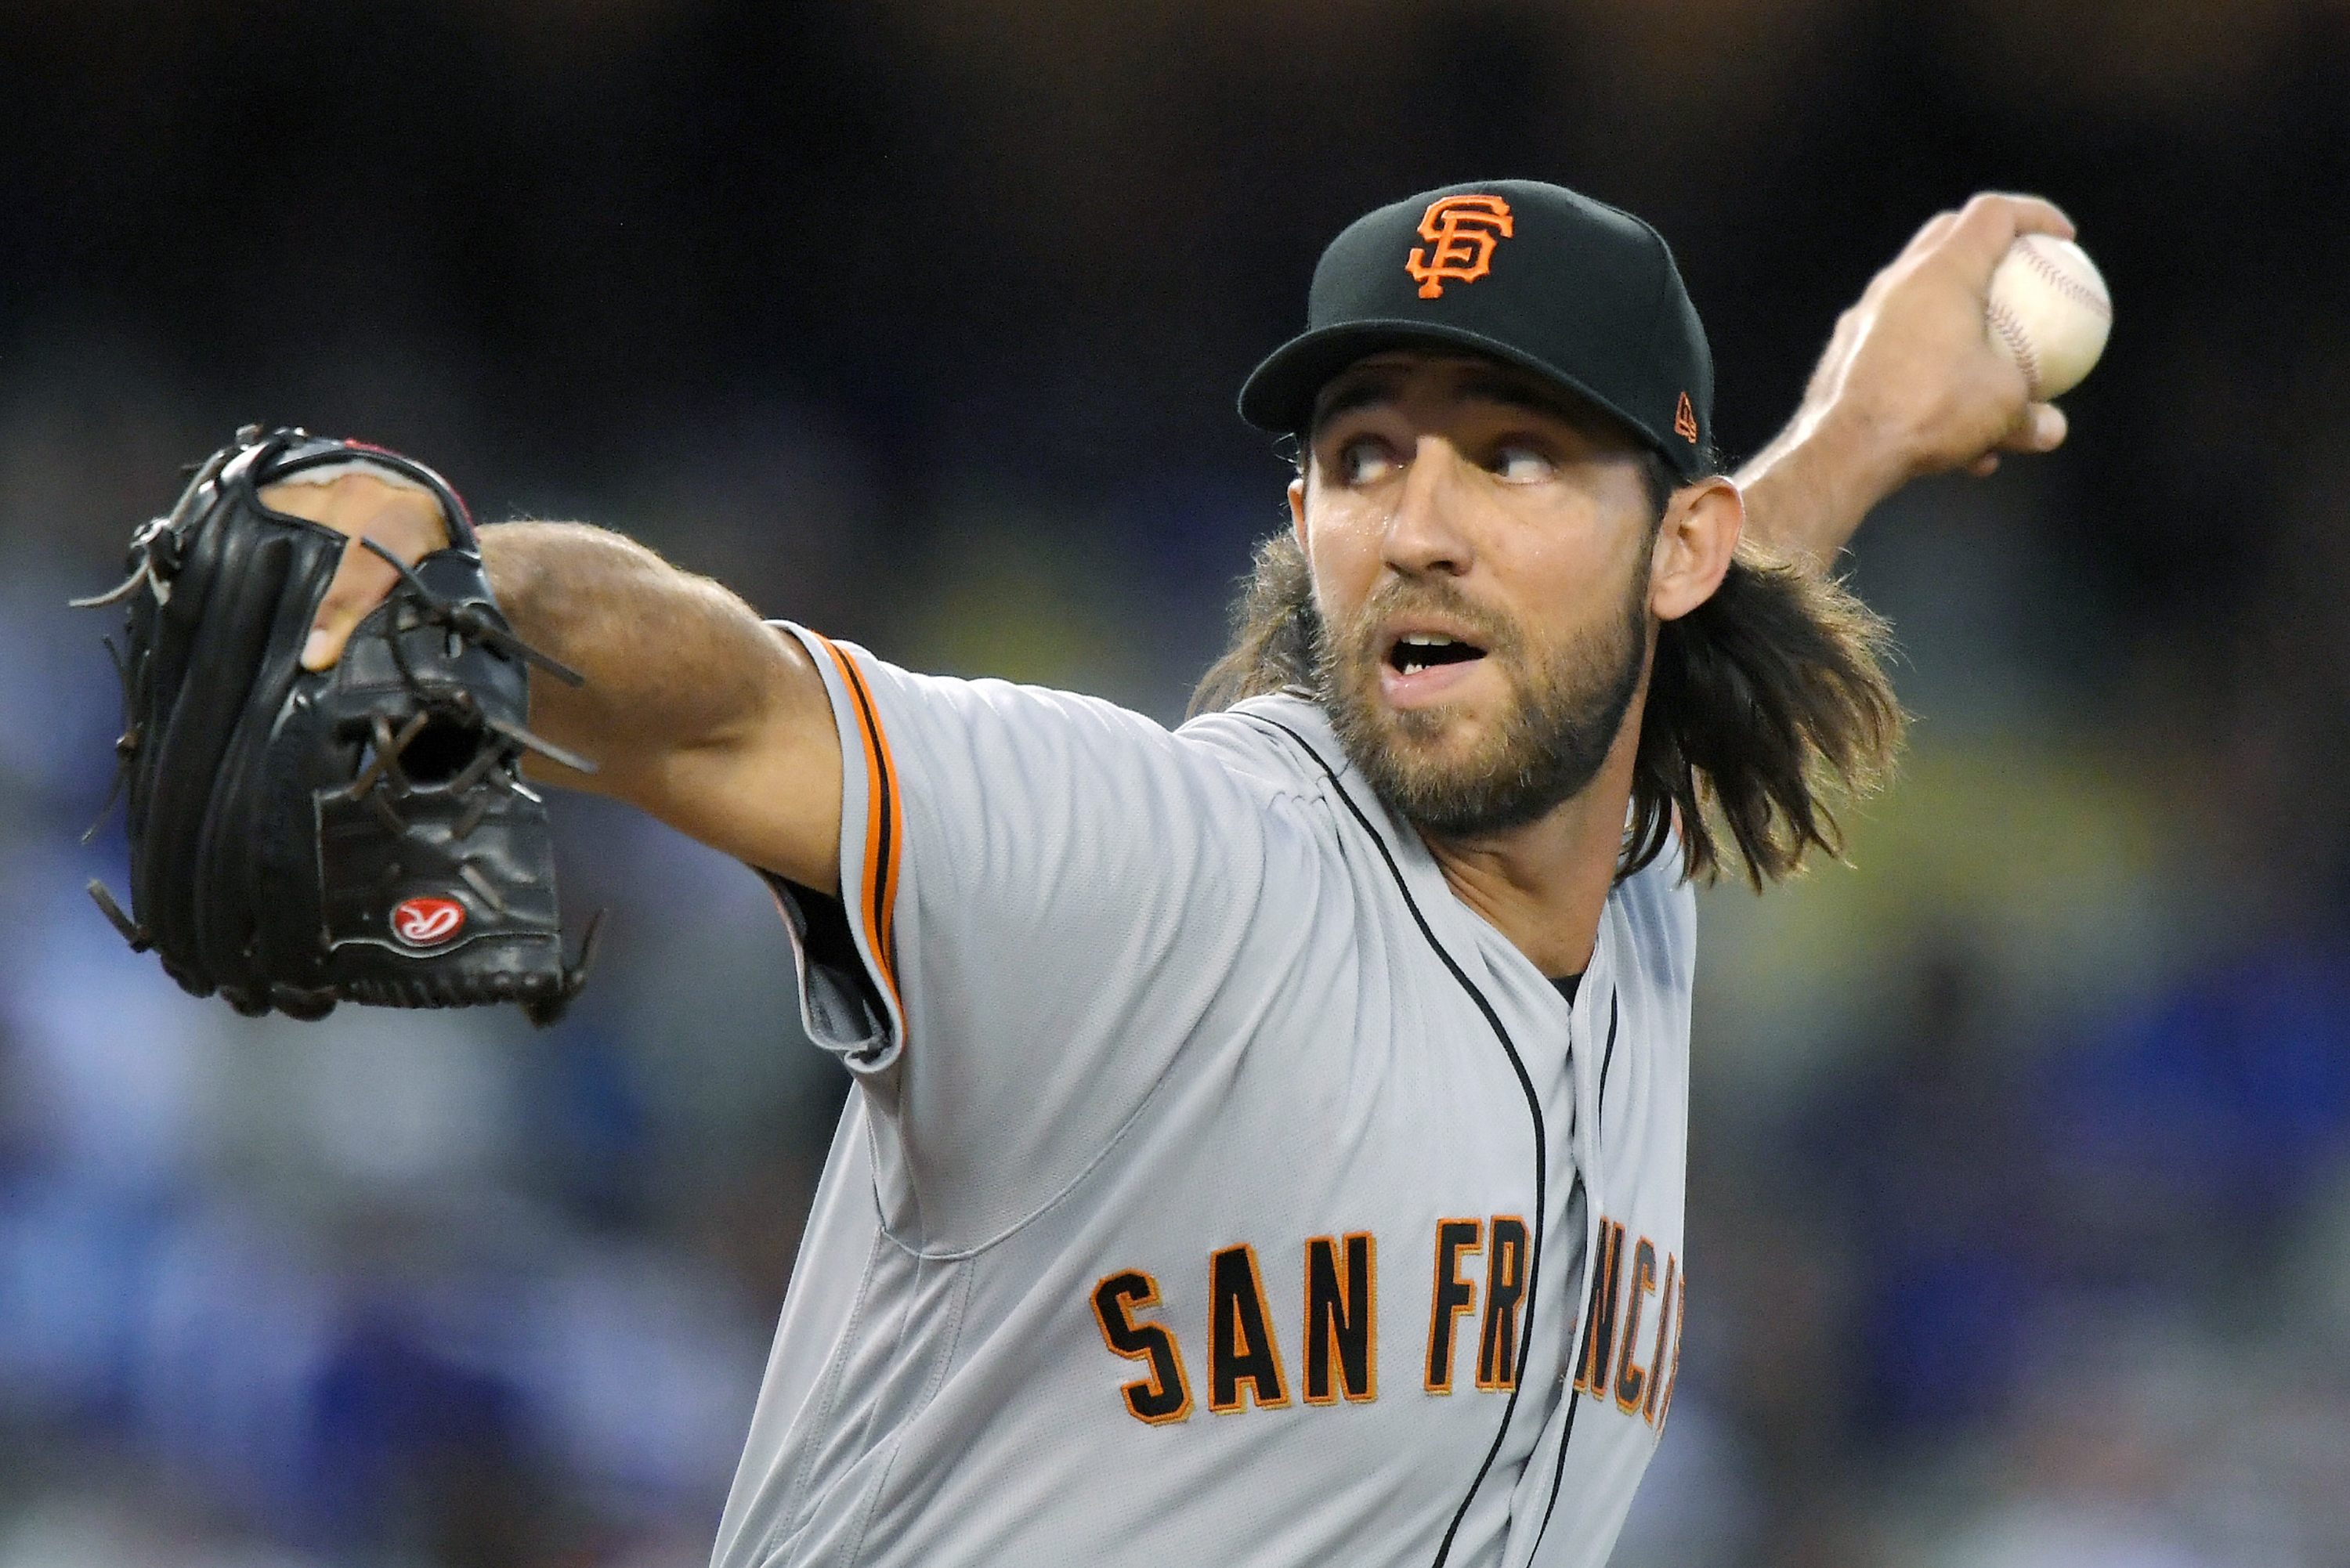 Madison Bumgarner Injury Puts Giants in an Impossible Situation